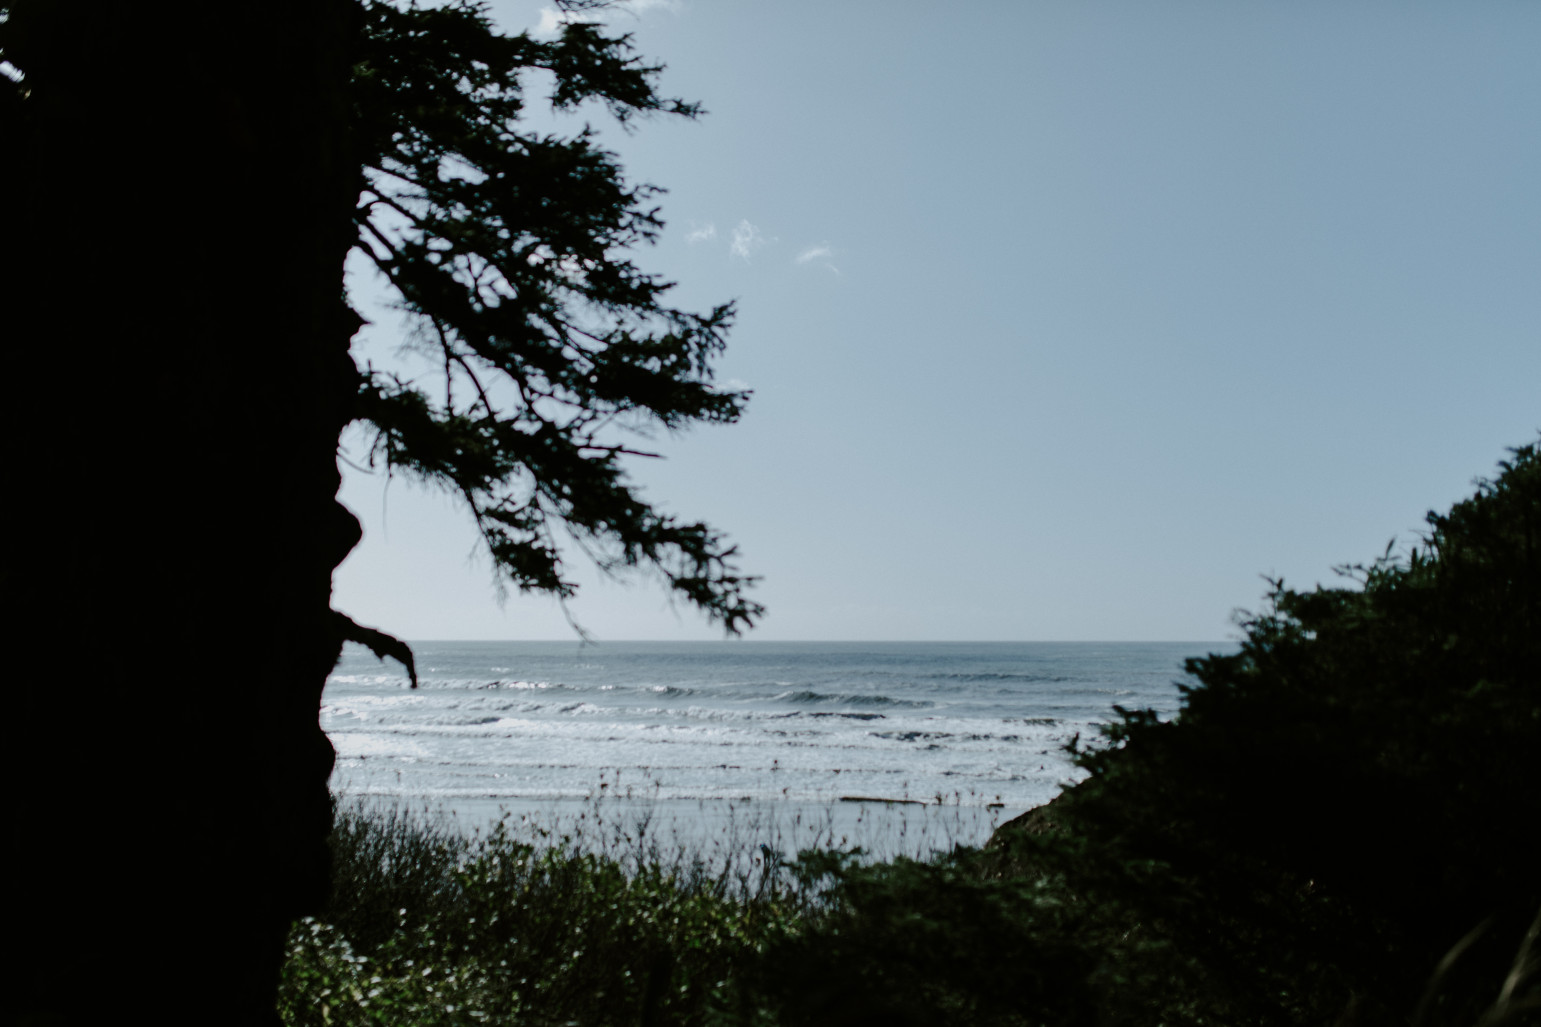 The view of the ocean, Cannon Beach. Elopement wedding photography at Cannon Beach by Sienna Plus Josh.